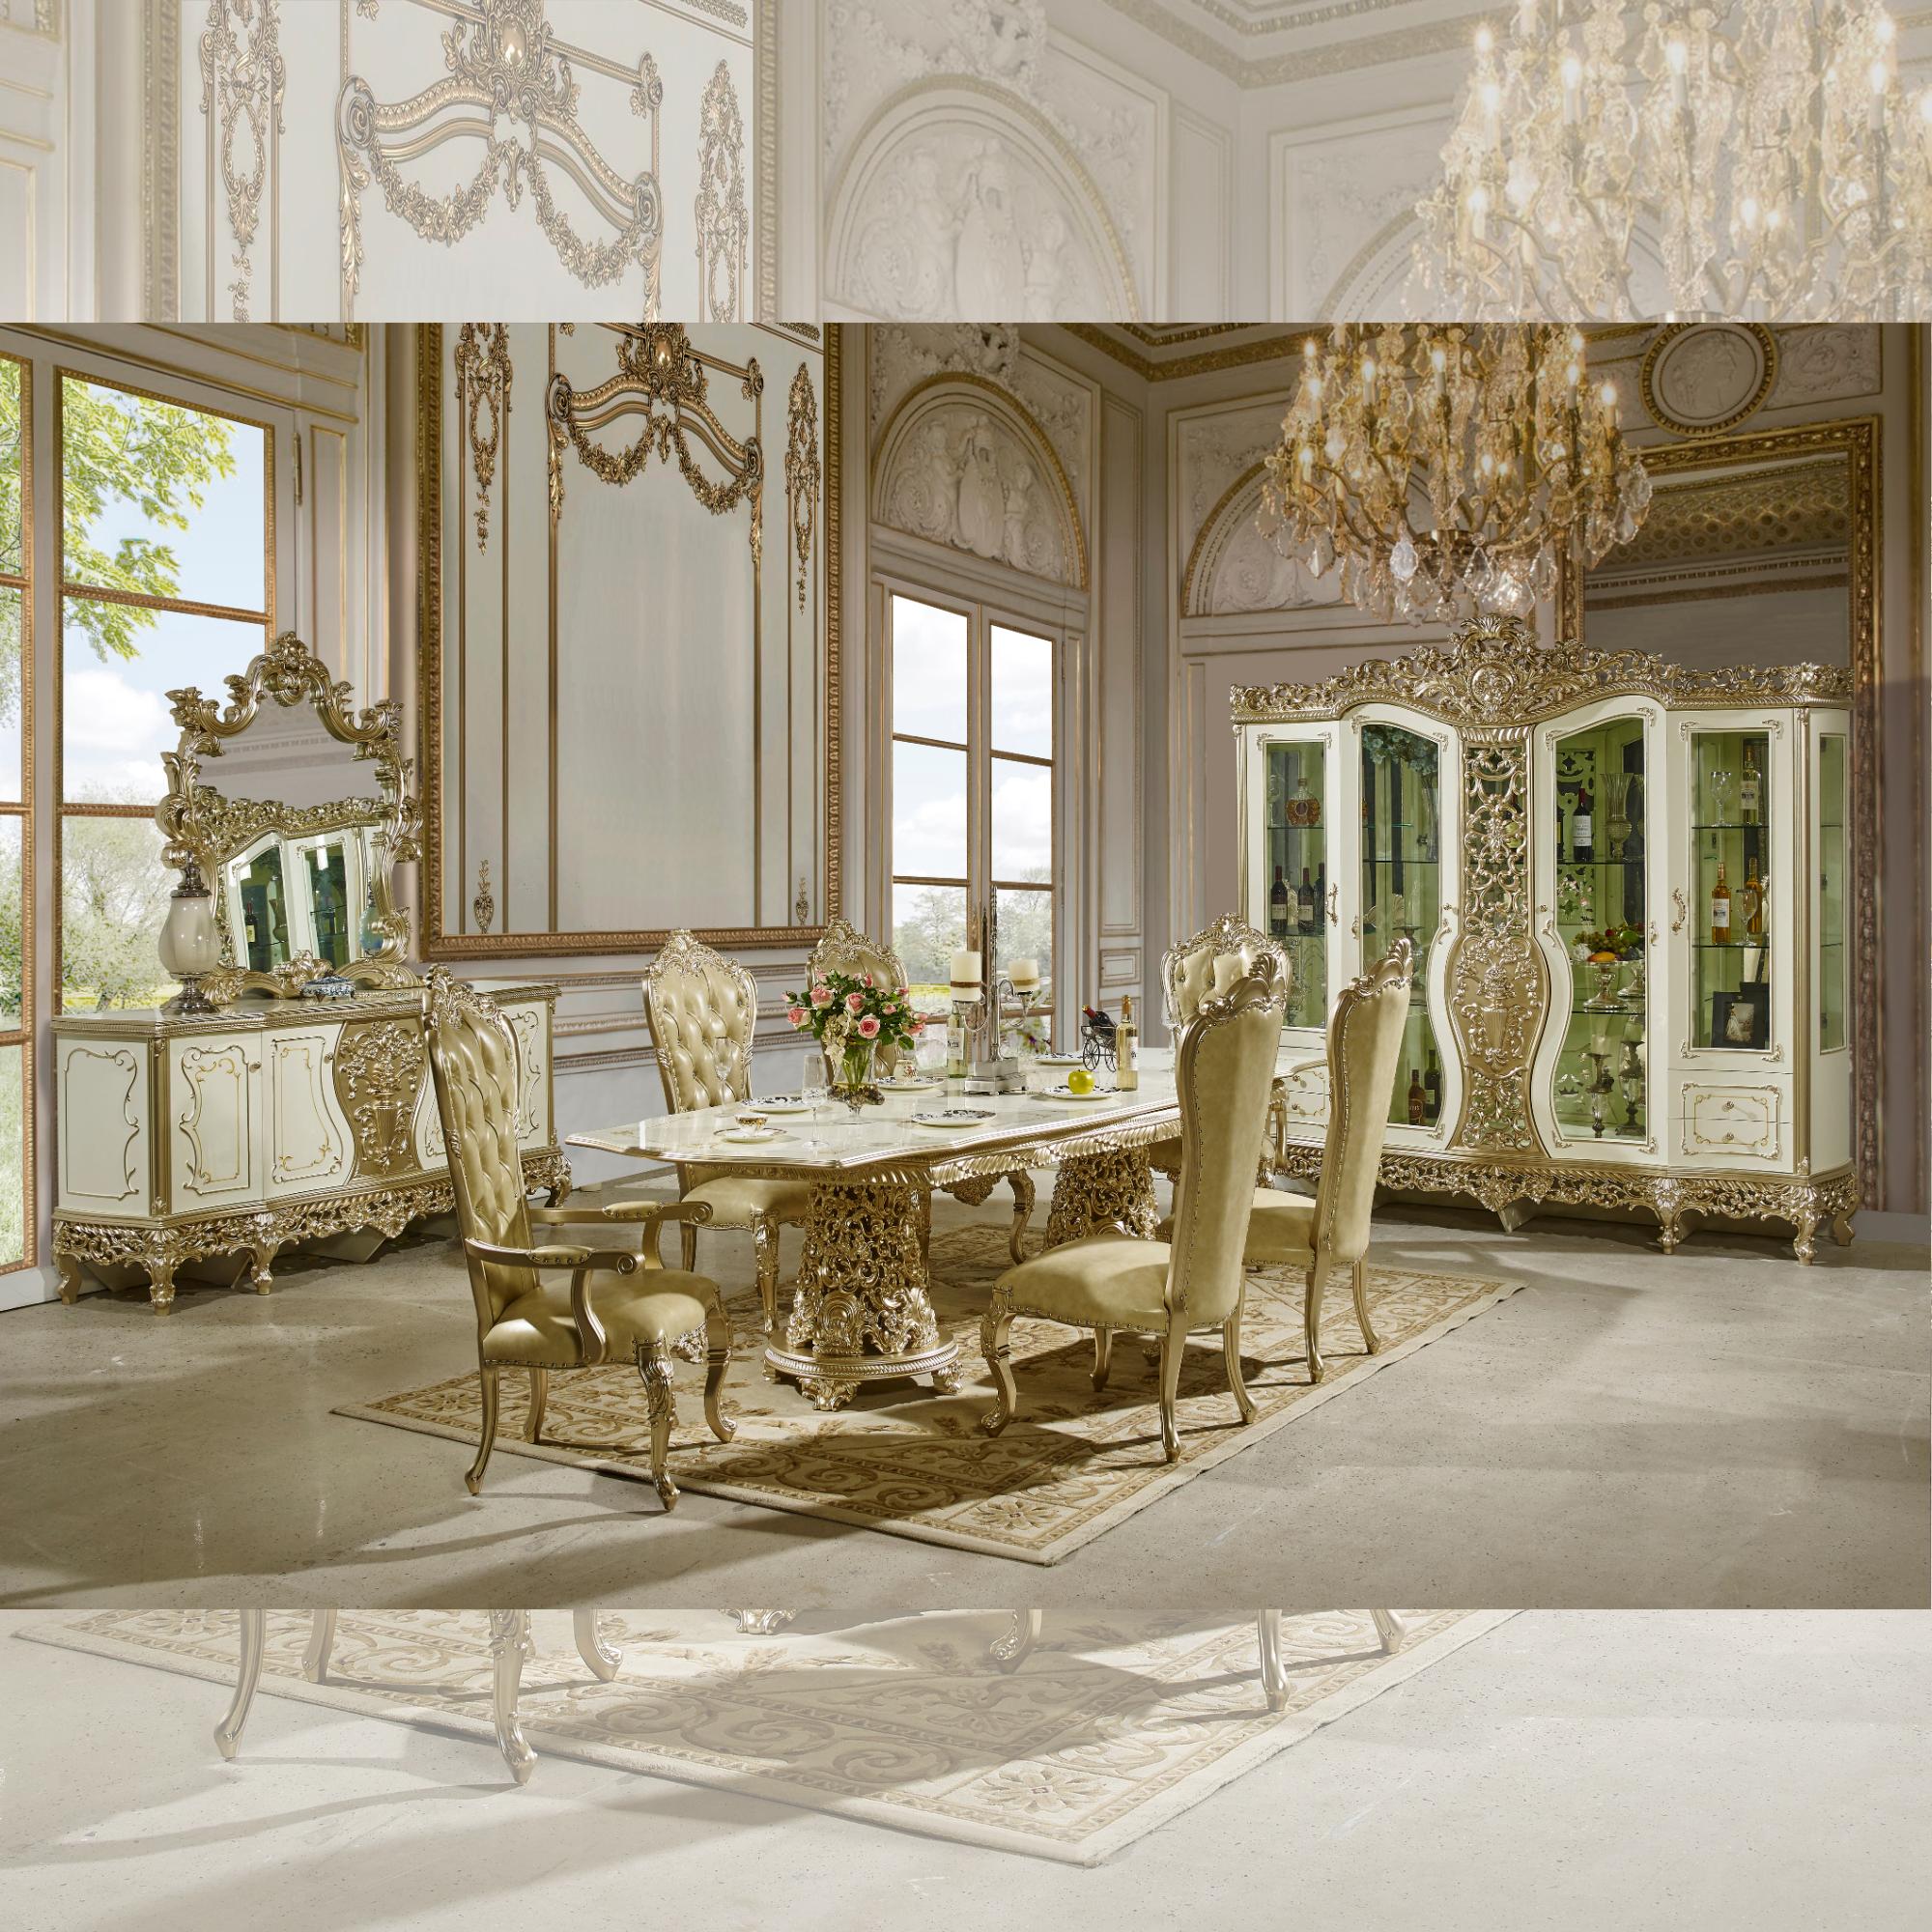 Classic, Traditional Dining Room Set HD-1812 Dining Room Set 7PCS HD-DIN1812-SET-7 HD-DIN1812-SET-7 in Gold, Beige Leather